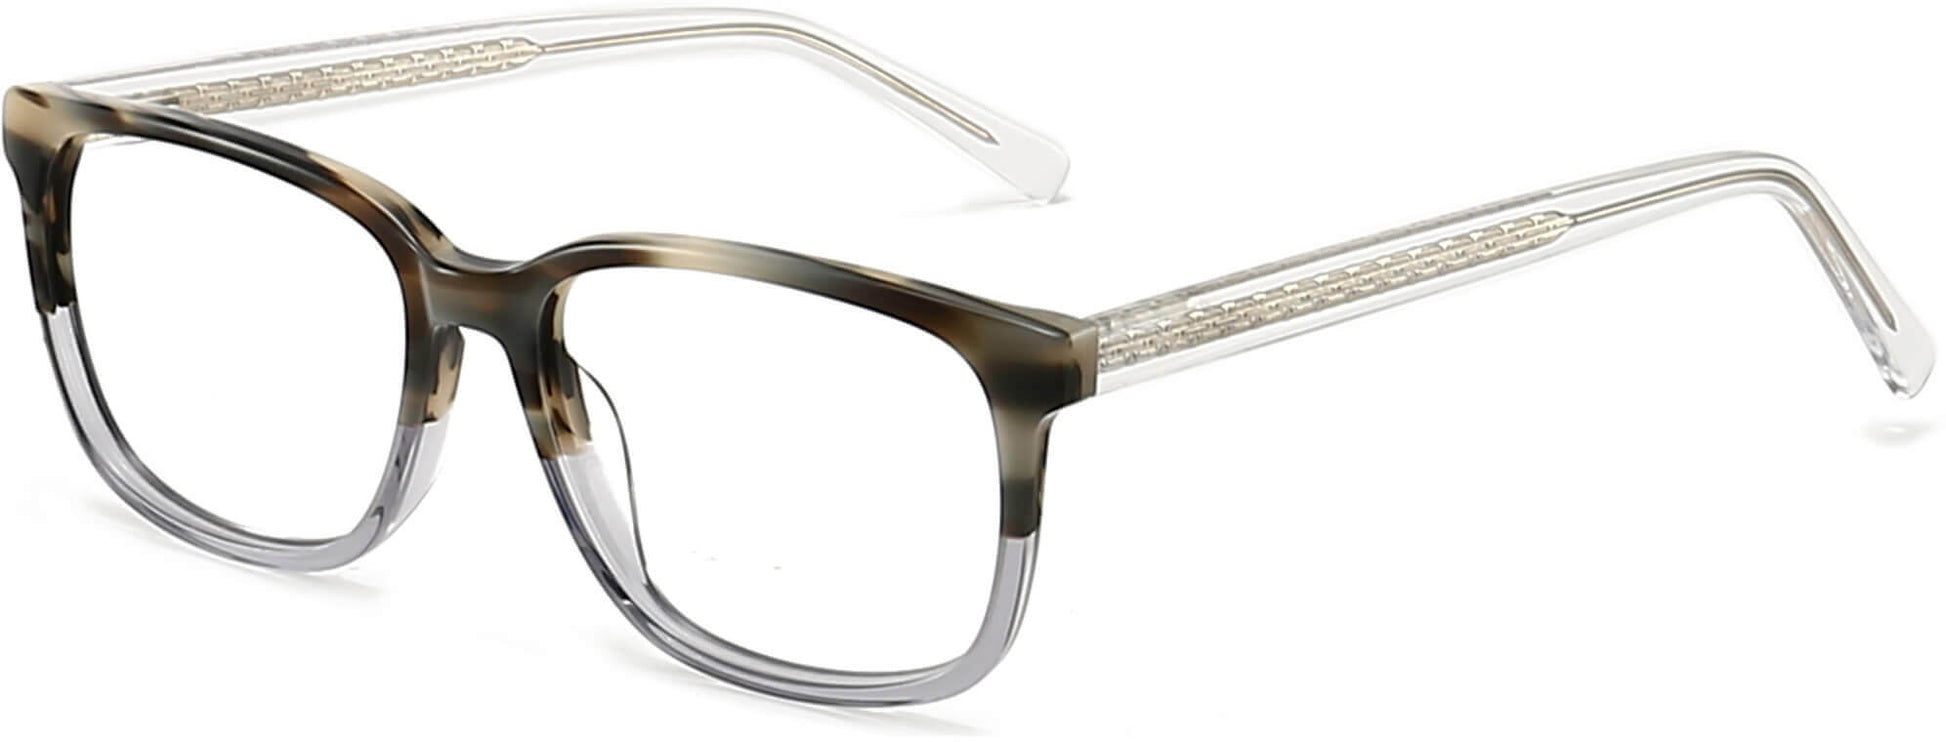 Mabel Square Tortoise Eyeglasses from ANRRI, angle view